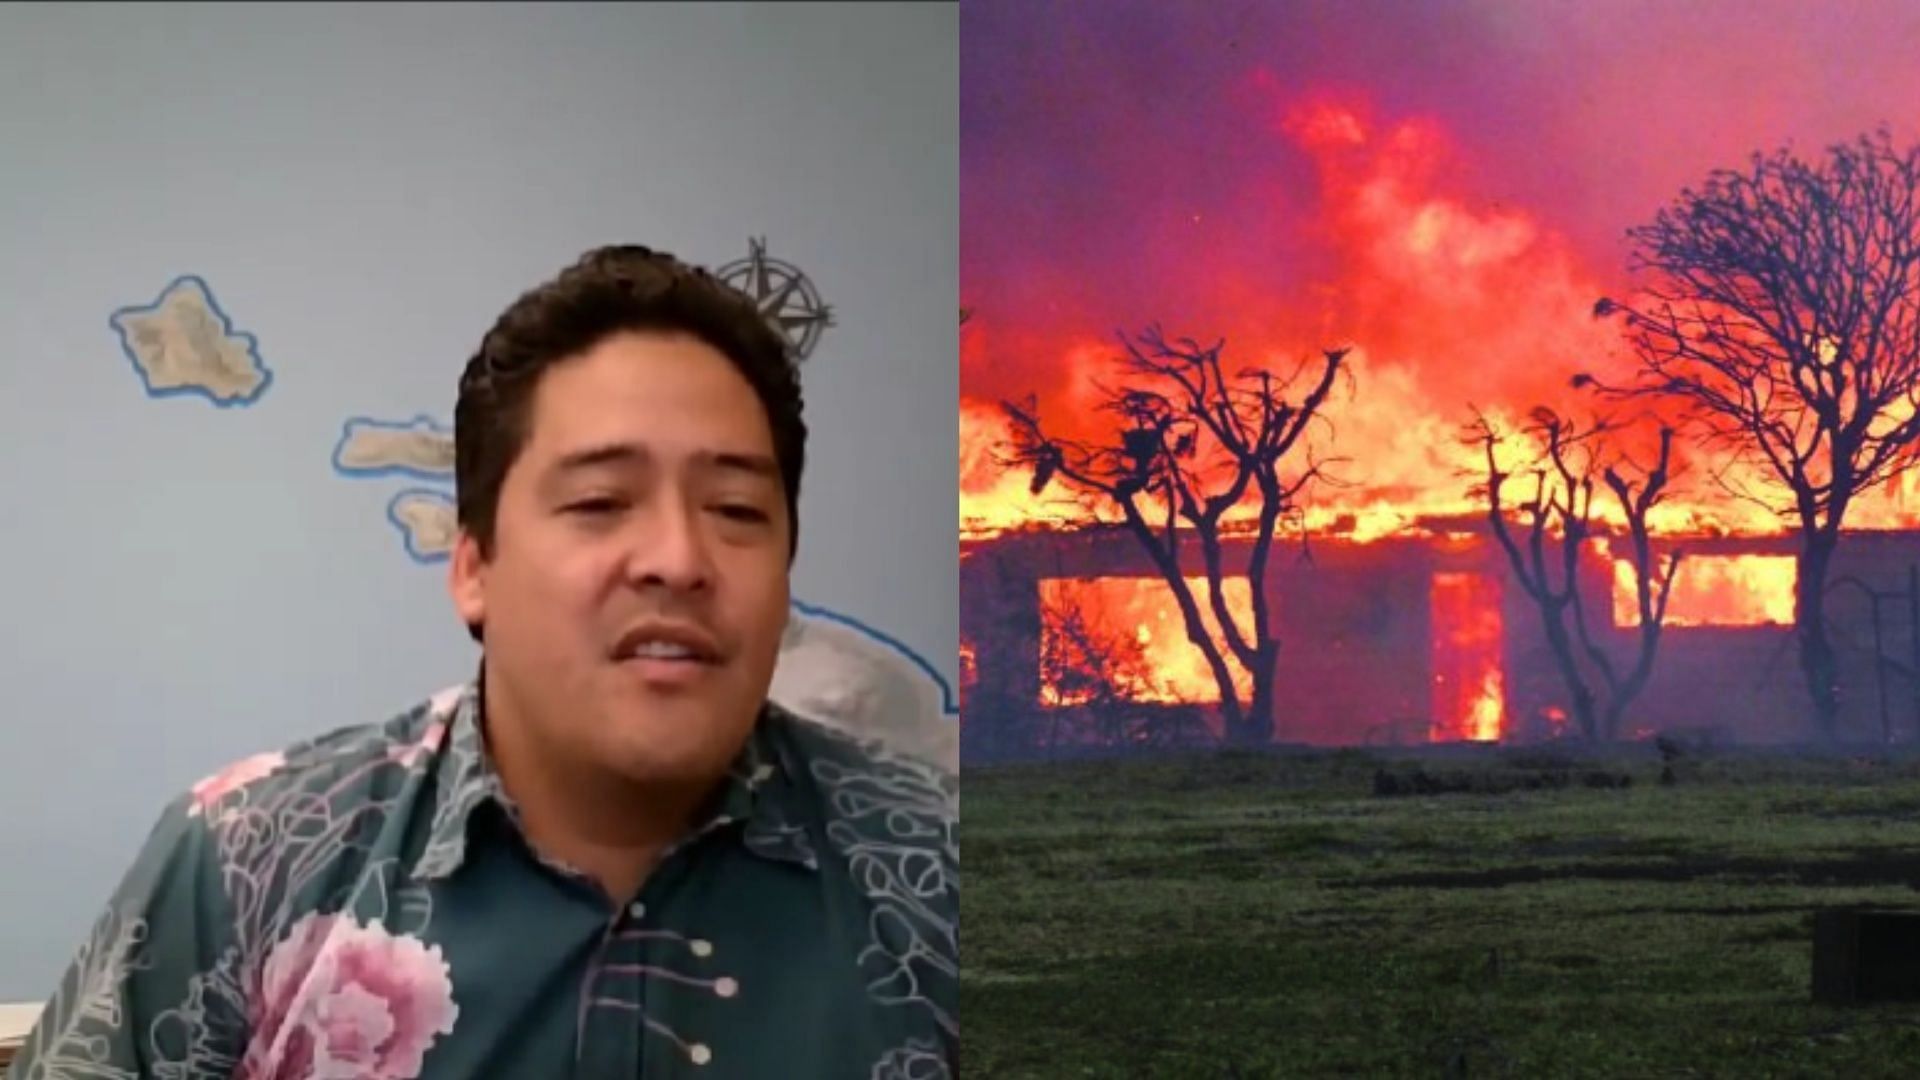 M. Kaleo Manuel was responsible for delaying the release of water to combat Maui fires. (Image via X/End Wokeness)